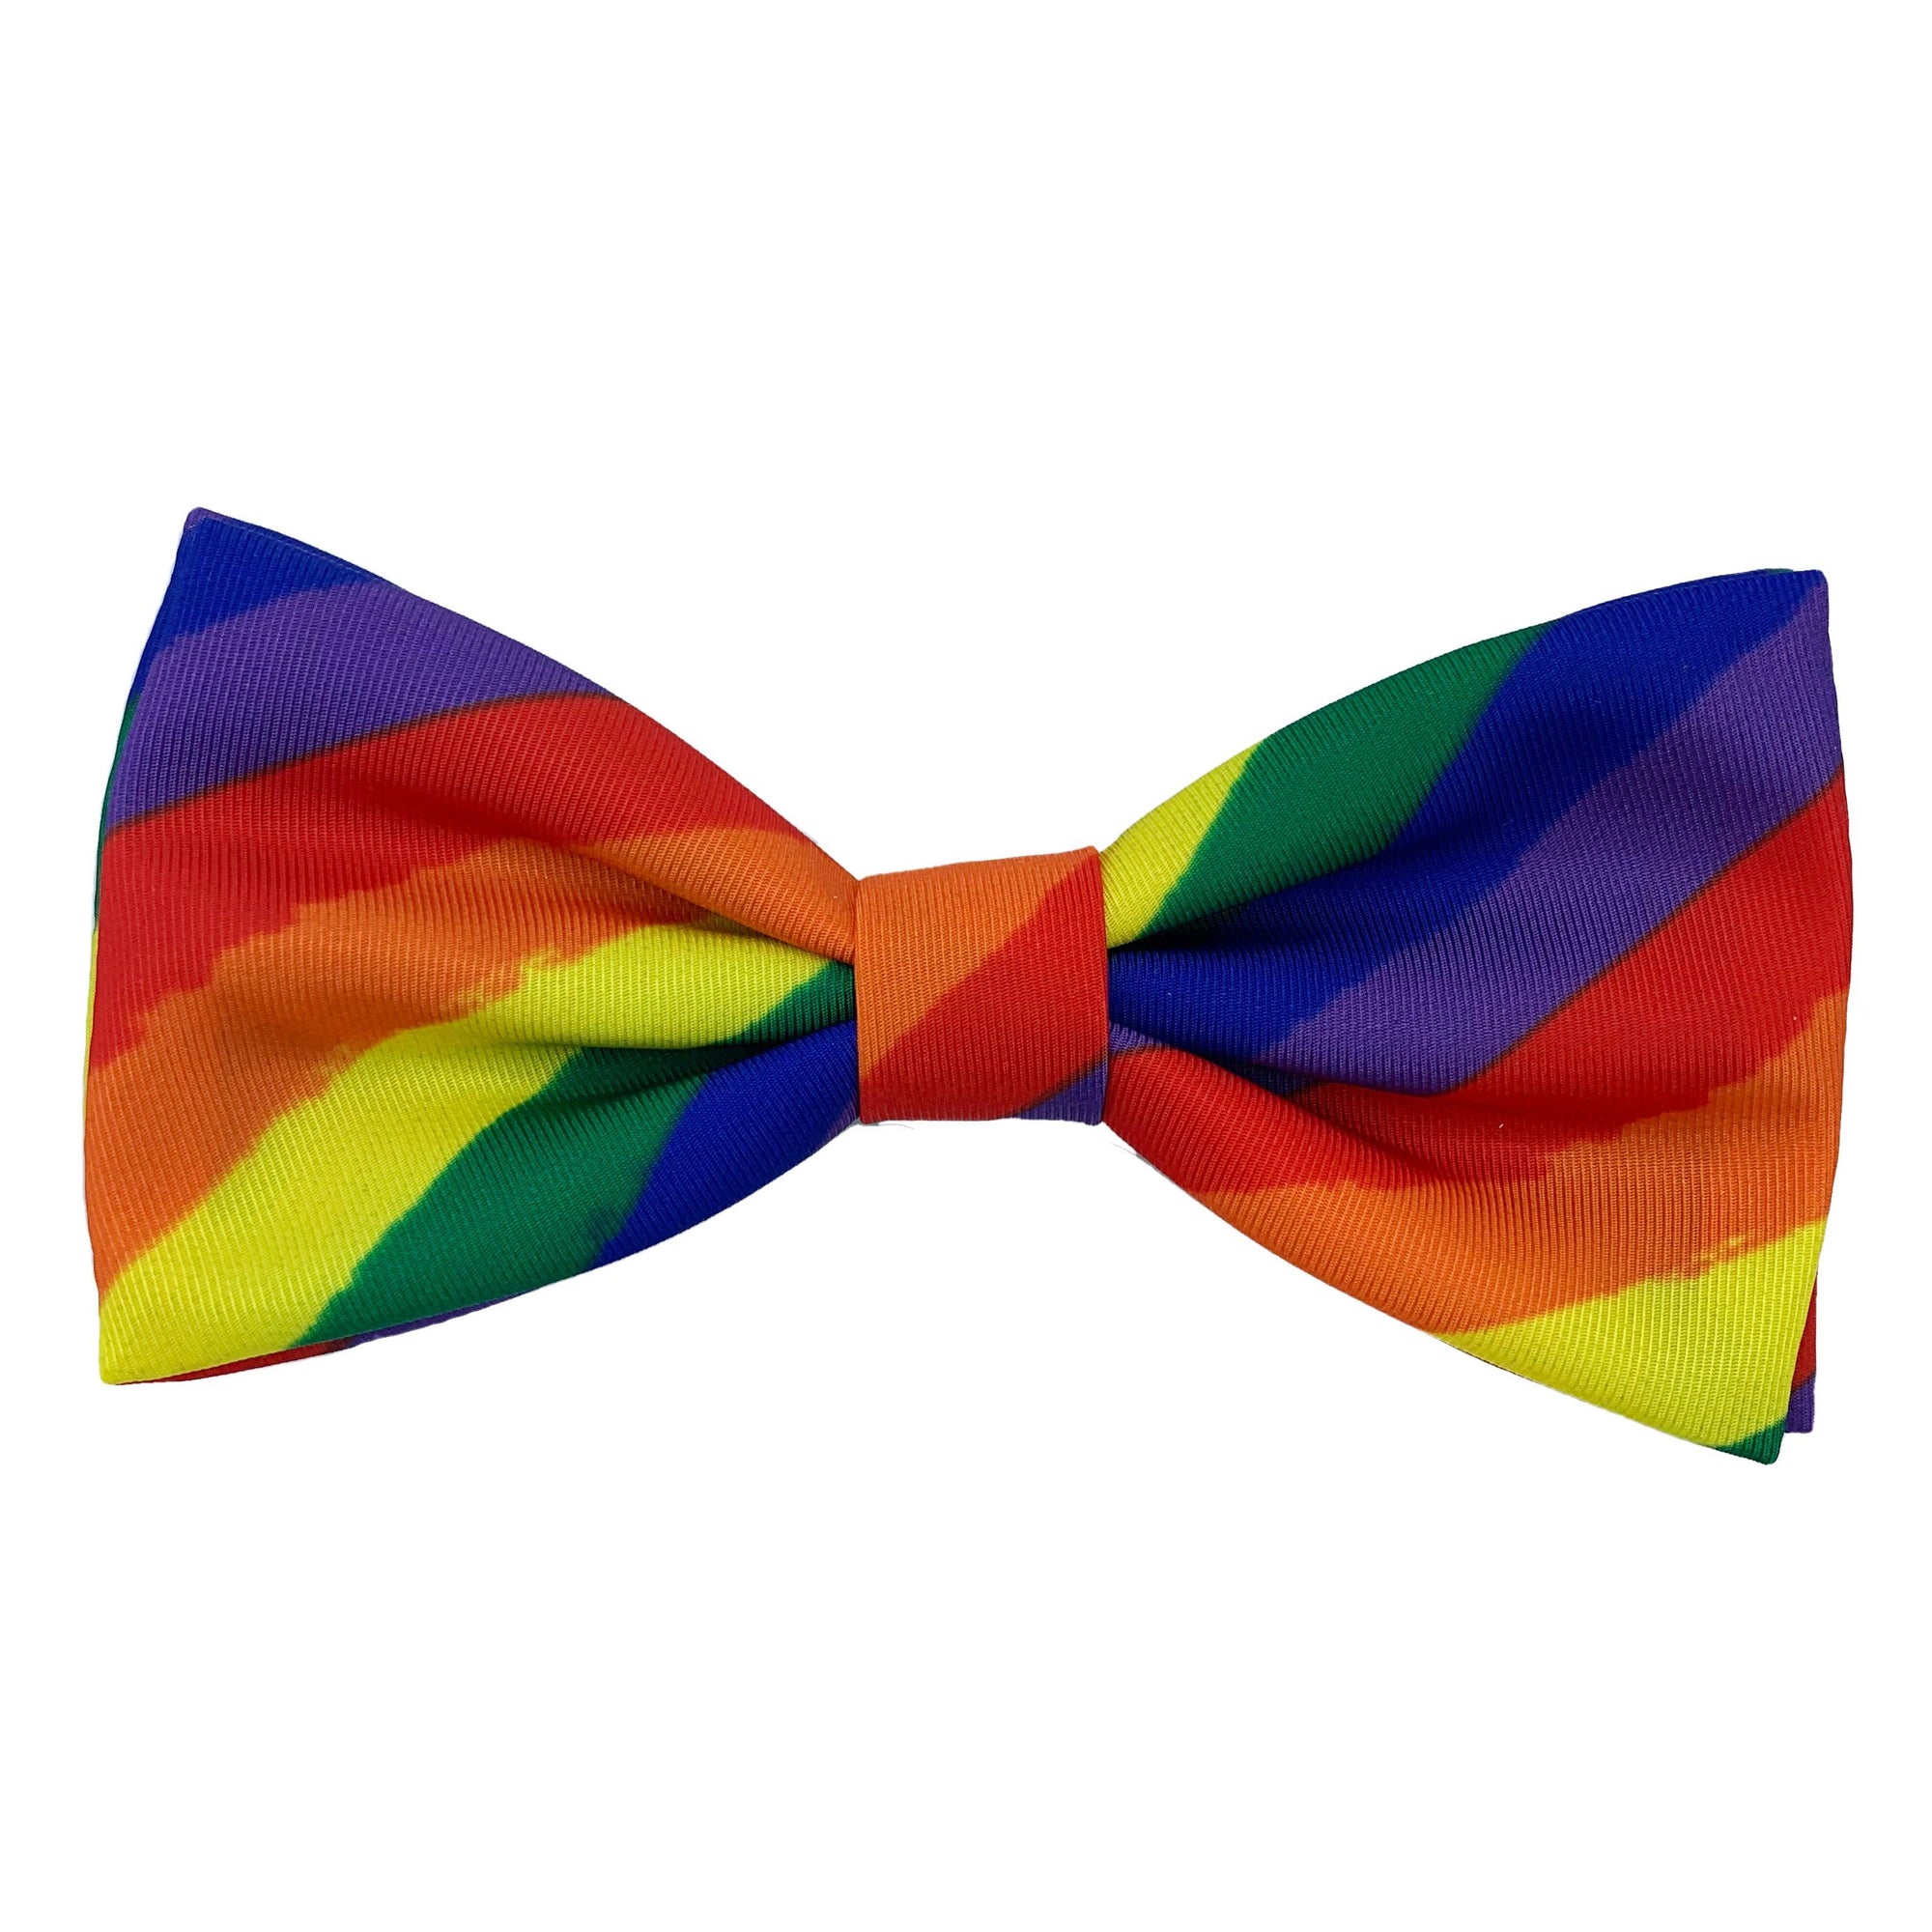 Huxley & Kent - Equality Bow Tie